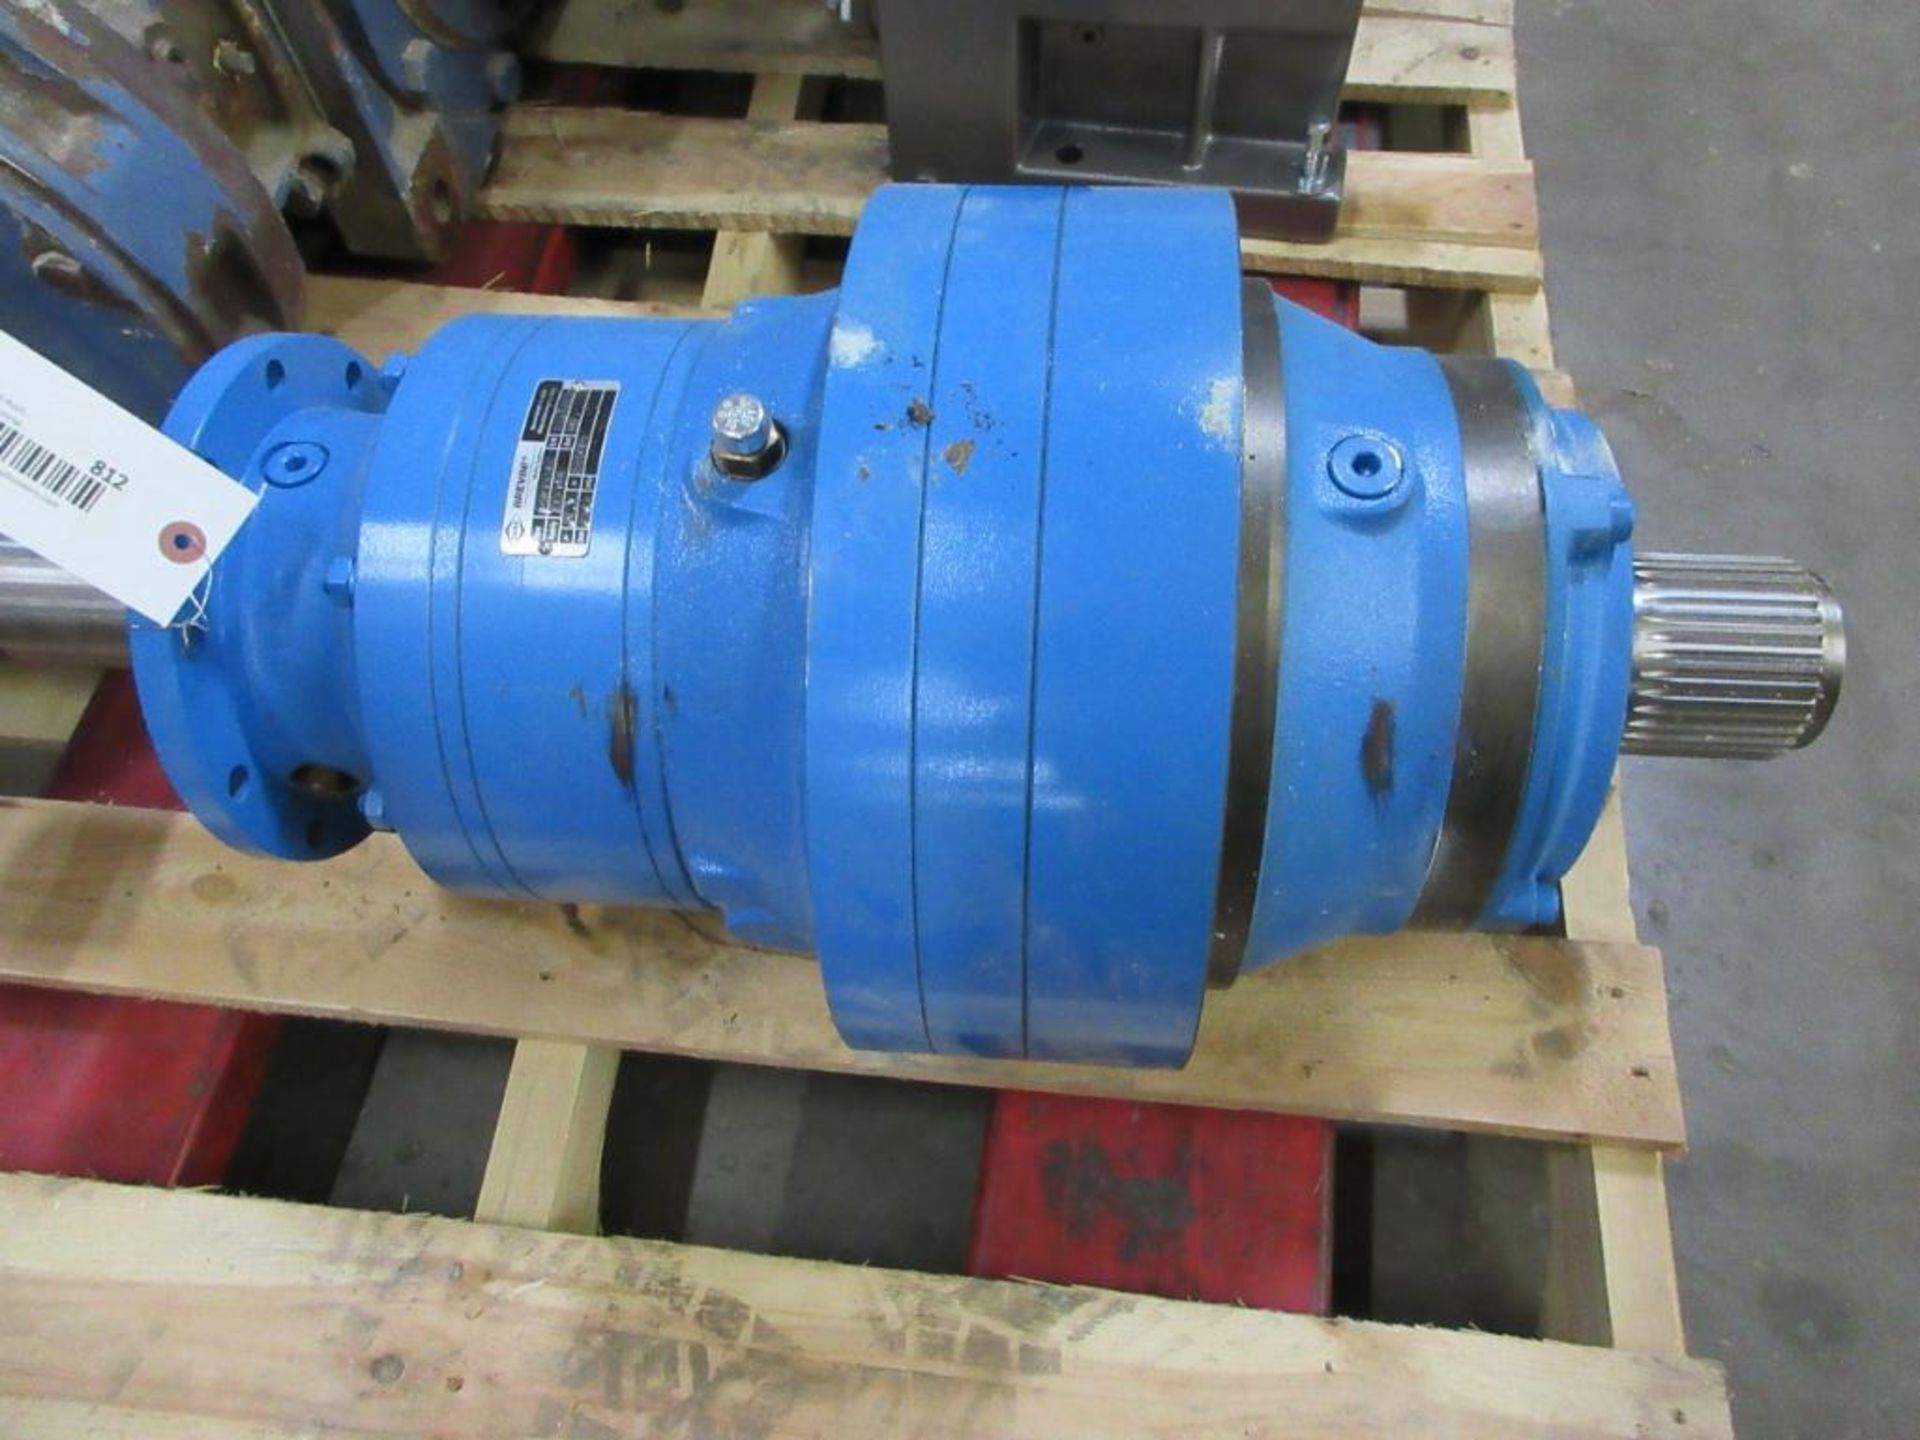 DANA BREVINI MOTION SYSTEMS B2011386 ET3150 INLINE GEAR REDUCER (THIS LOT IS FOB CAMARILLO CA) - (Th